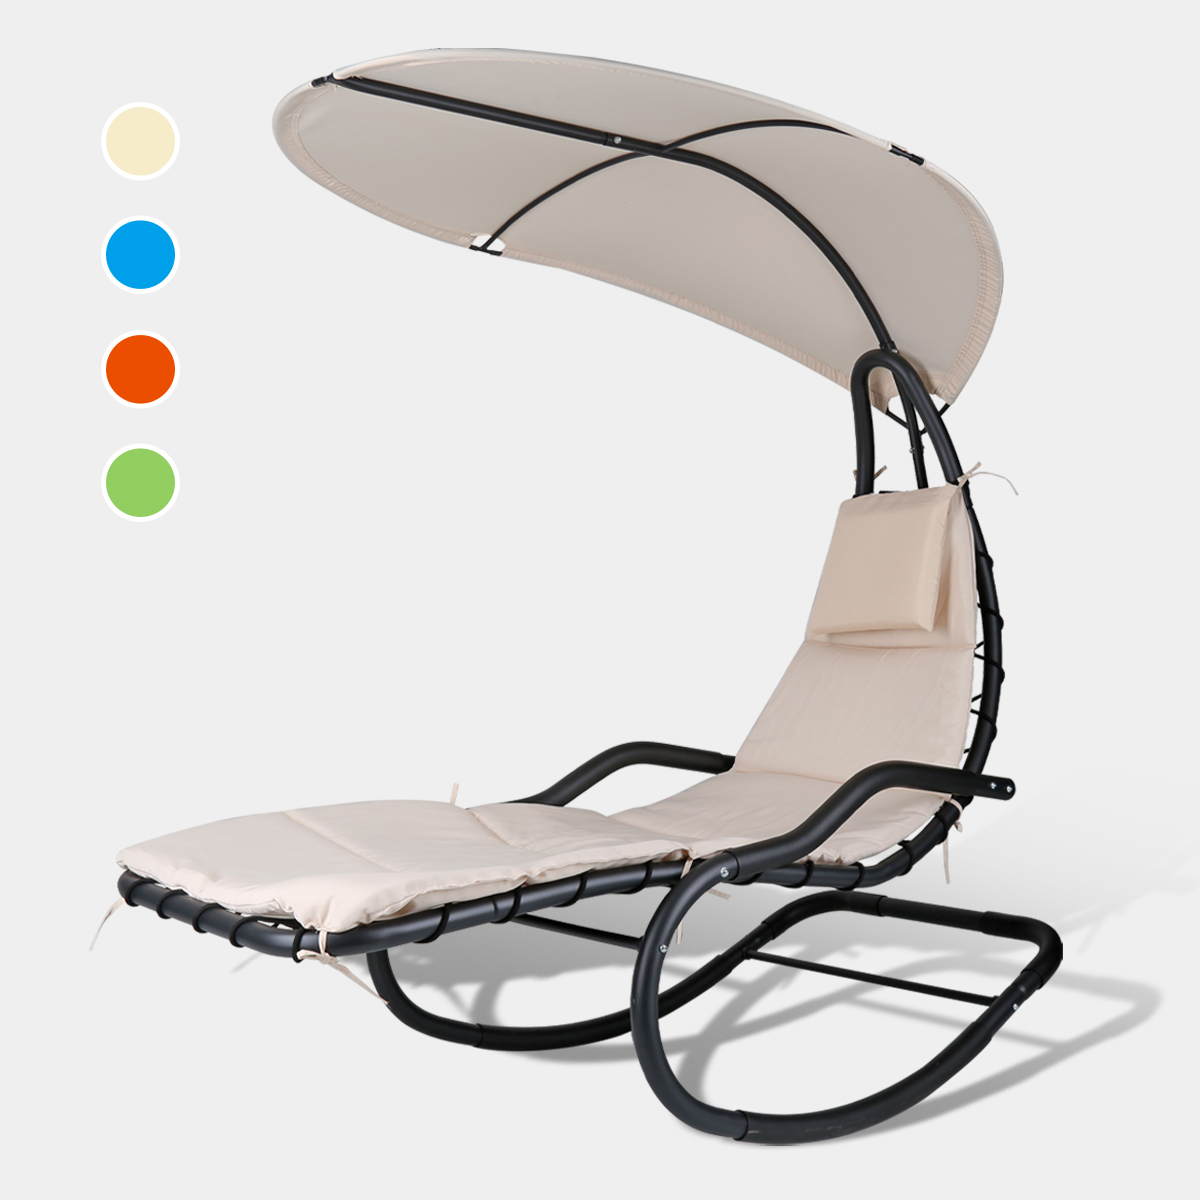 Rocking Hanging Lounge Chair - Curved Chaise Rocking Lounge Chair Swing For Backyard Patio w/ Built-in Pillow Removable Canopy with stand {Beige} - image 3 of 8